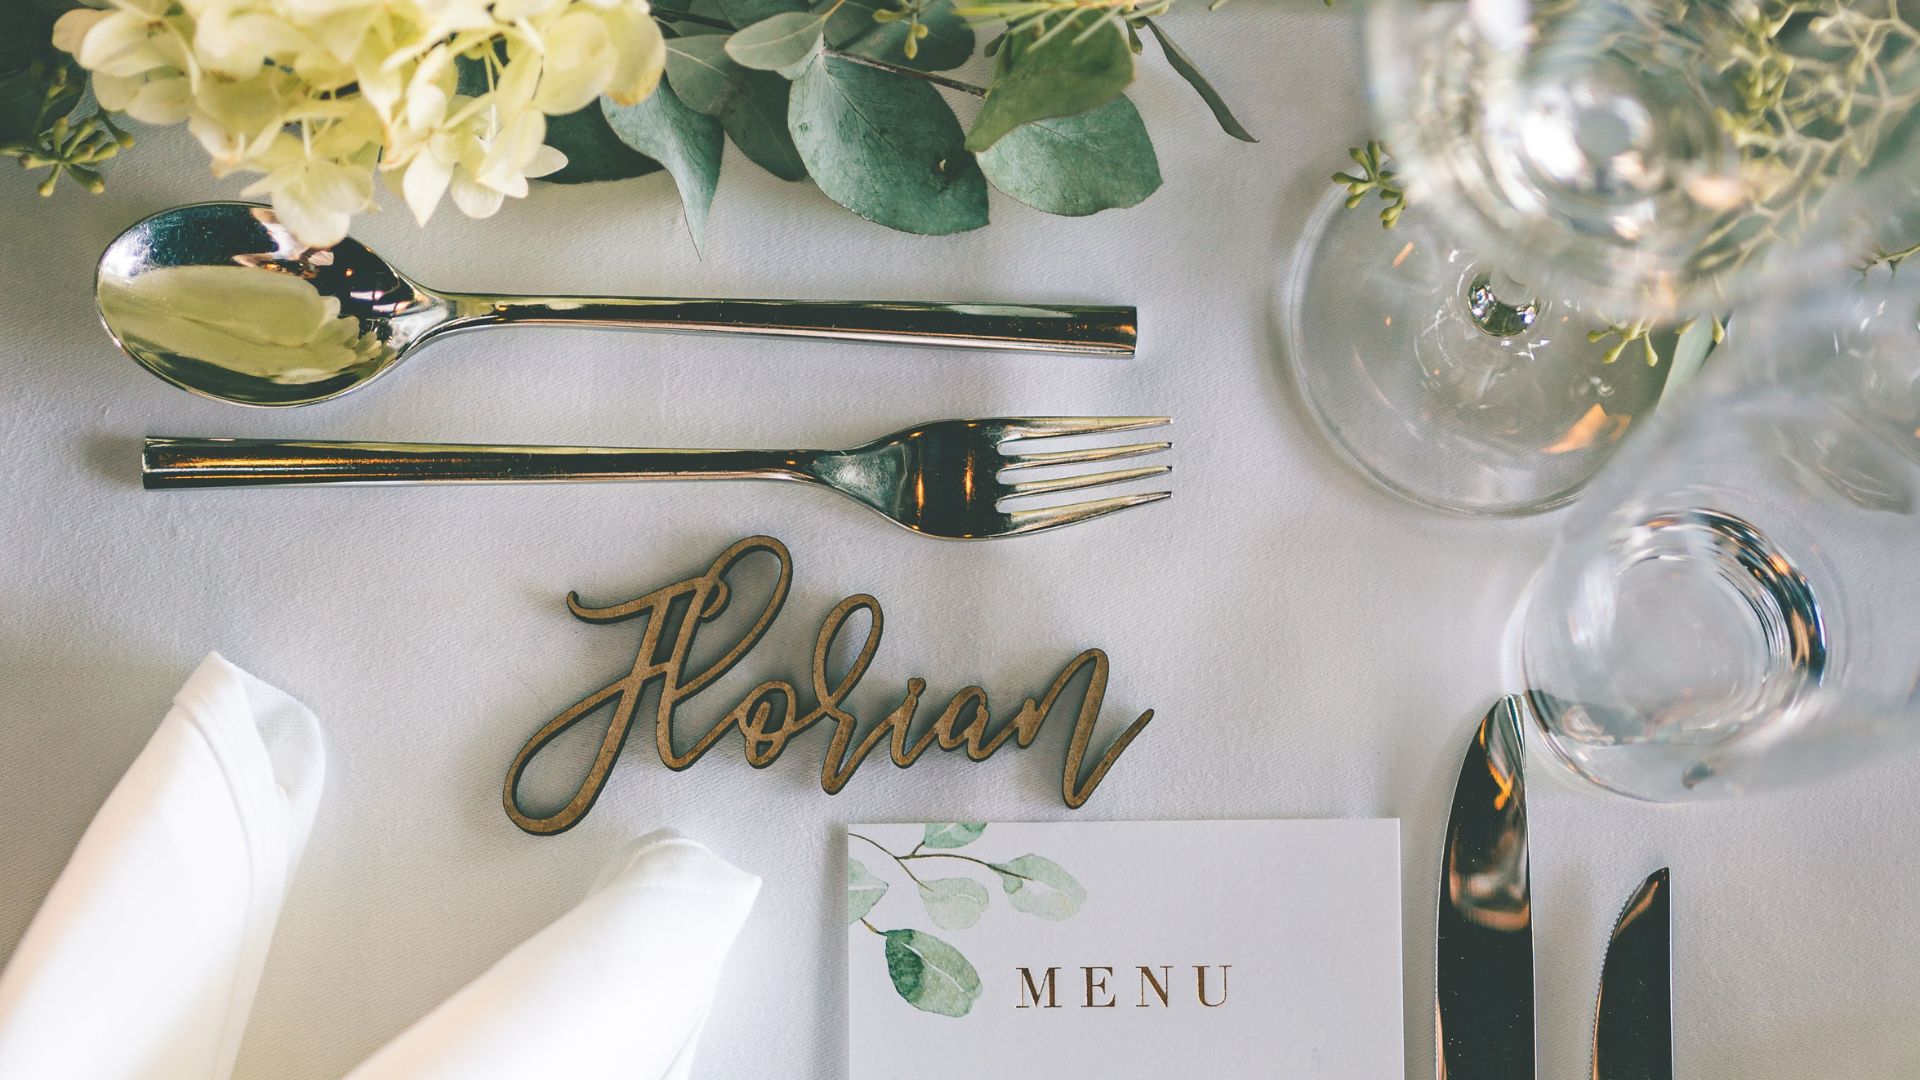 Festive table setting with menu card on white tablecloth